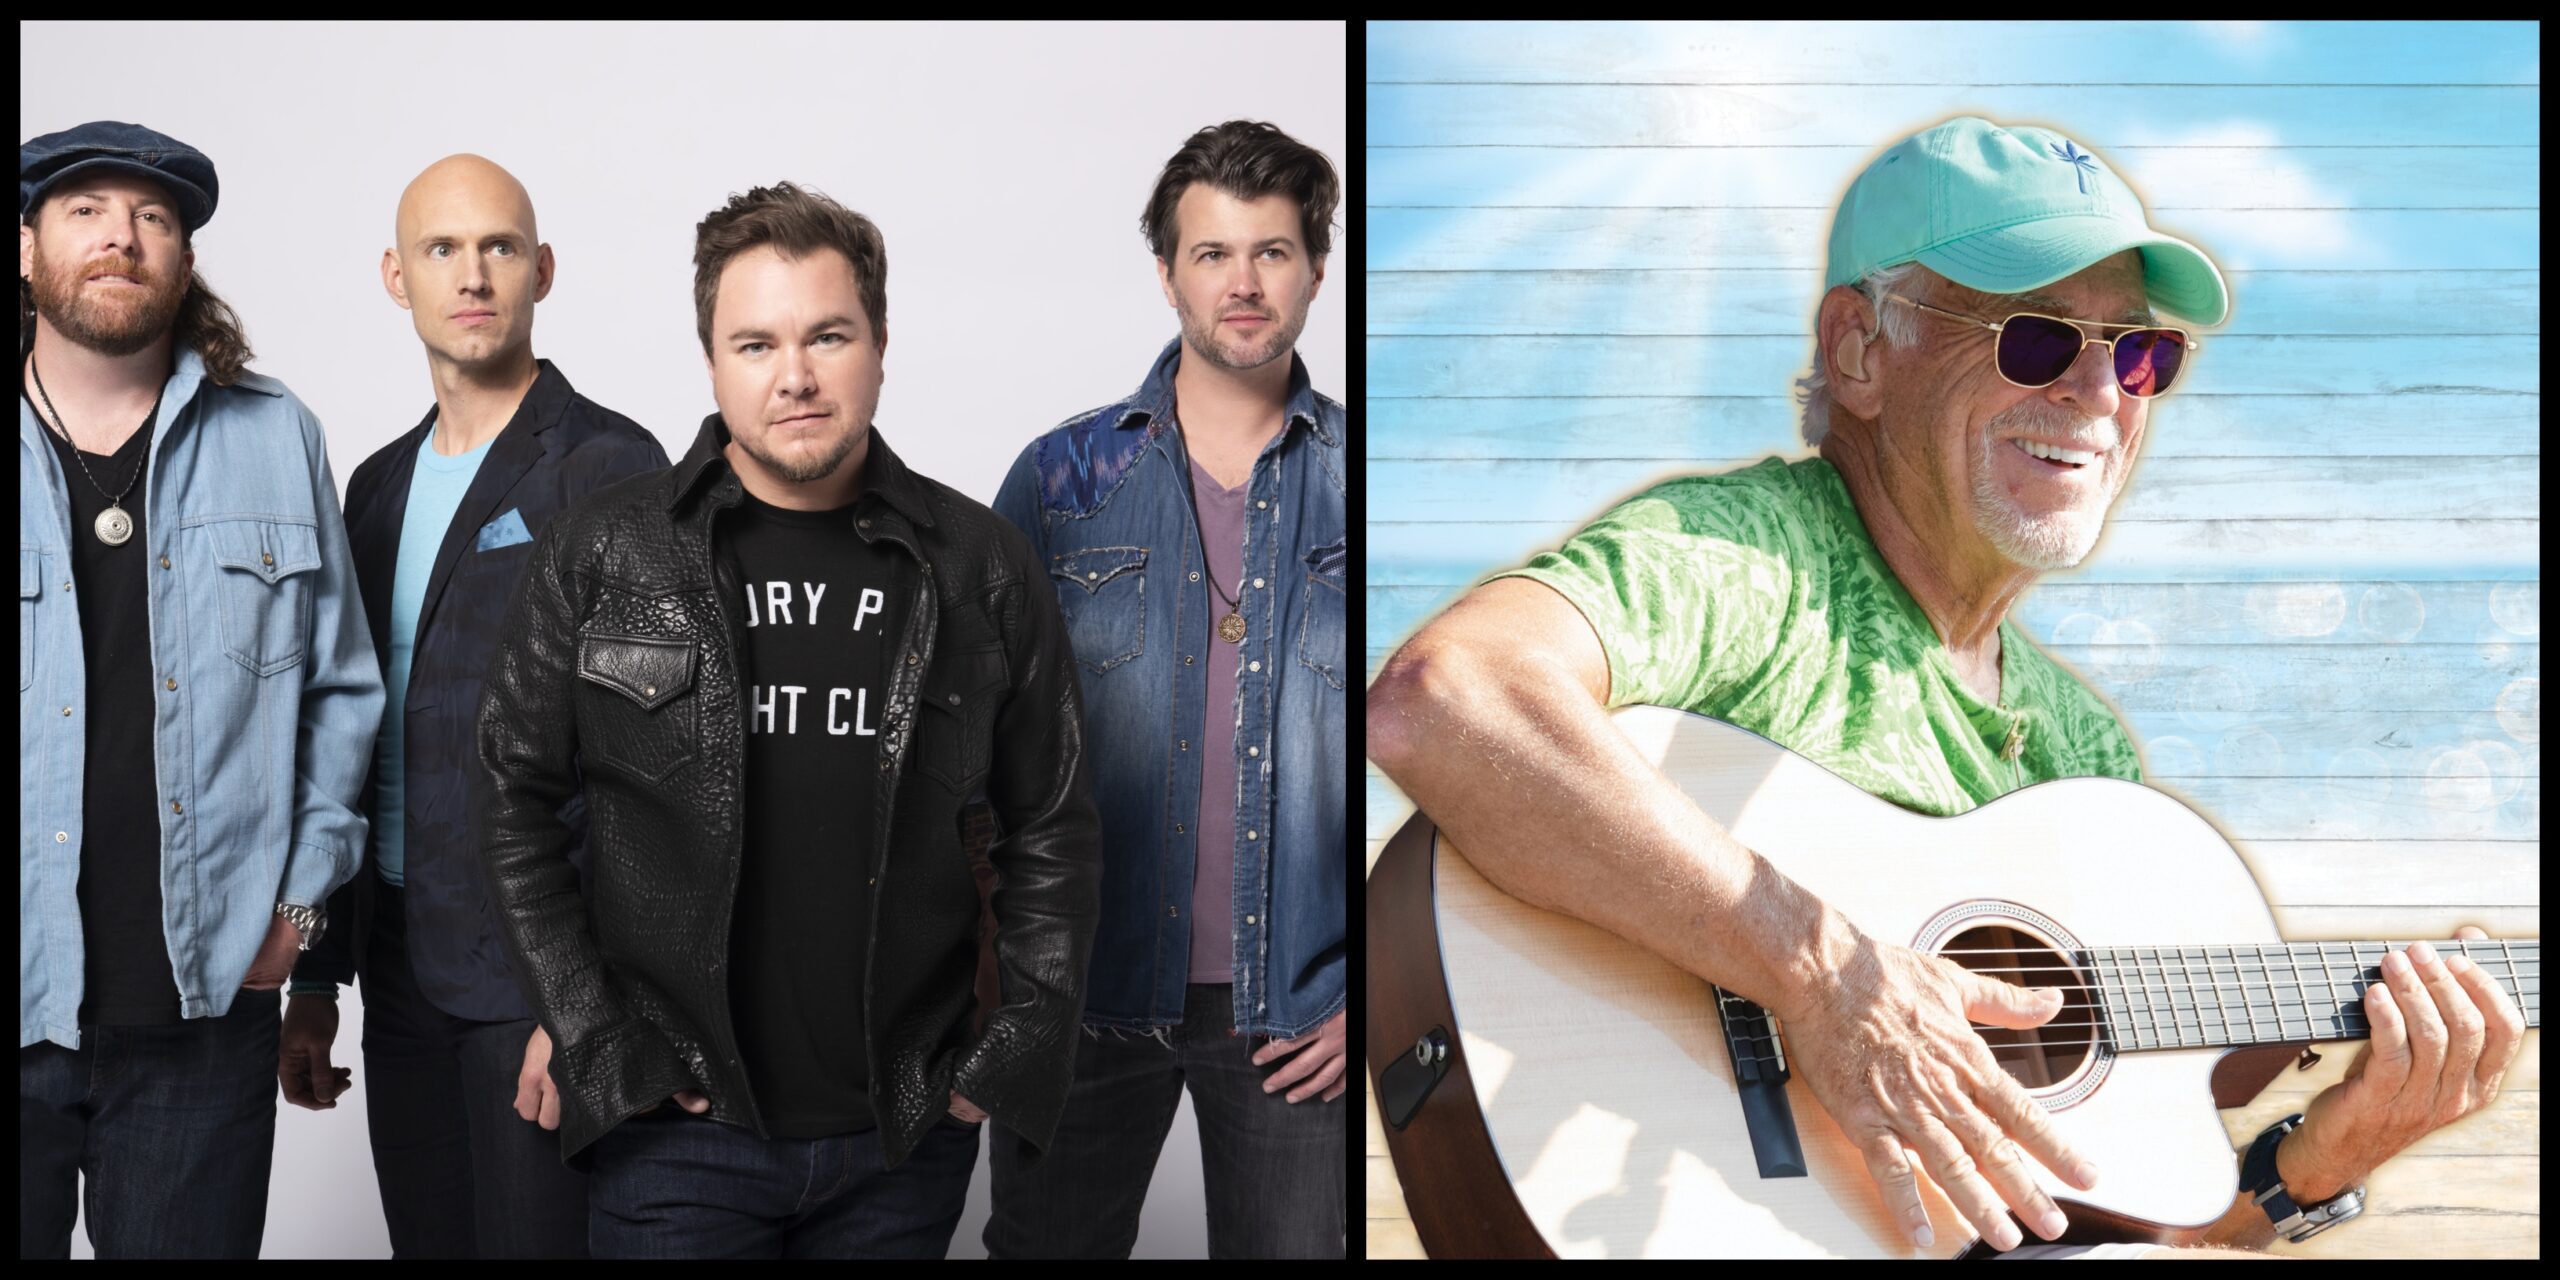 Jimmy Buffett and Eli Young Band Go To Church For New Collaboration ‘Saltwater Gospel (Fins Up Edition)” – Listen